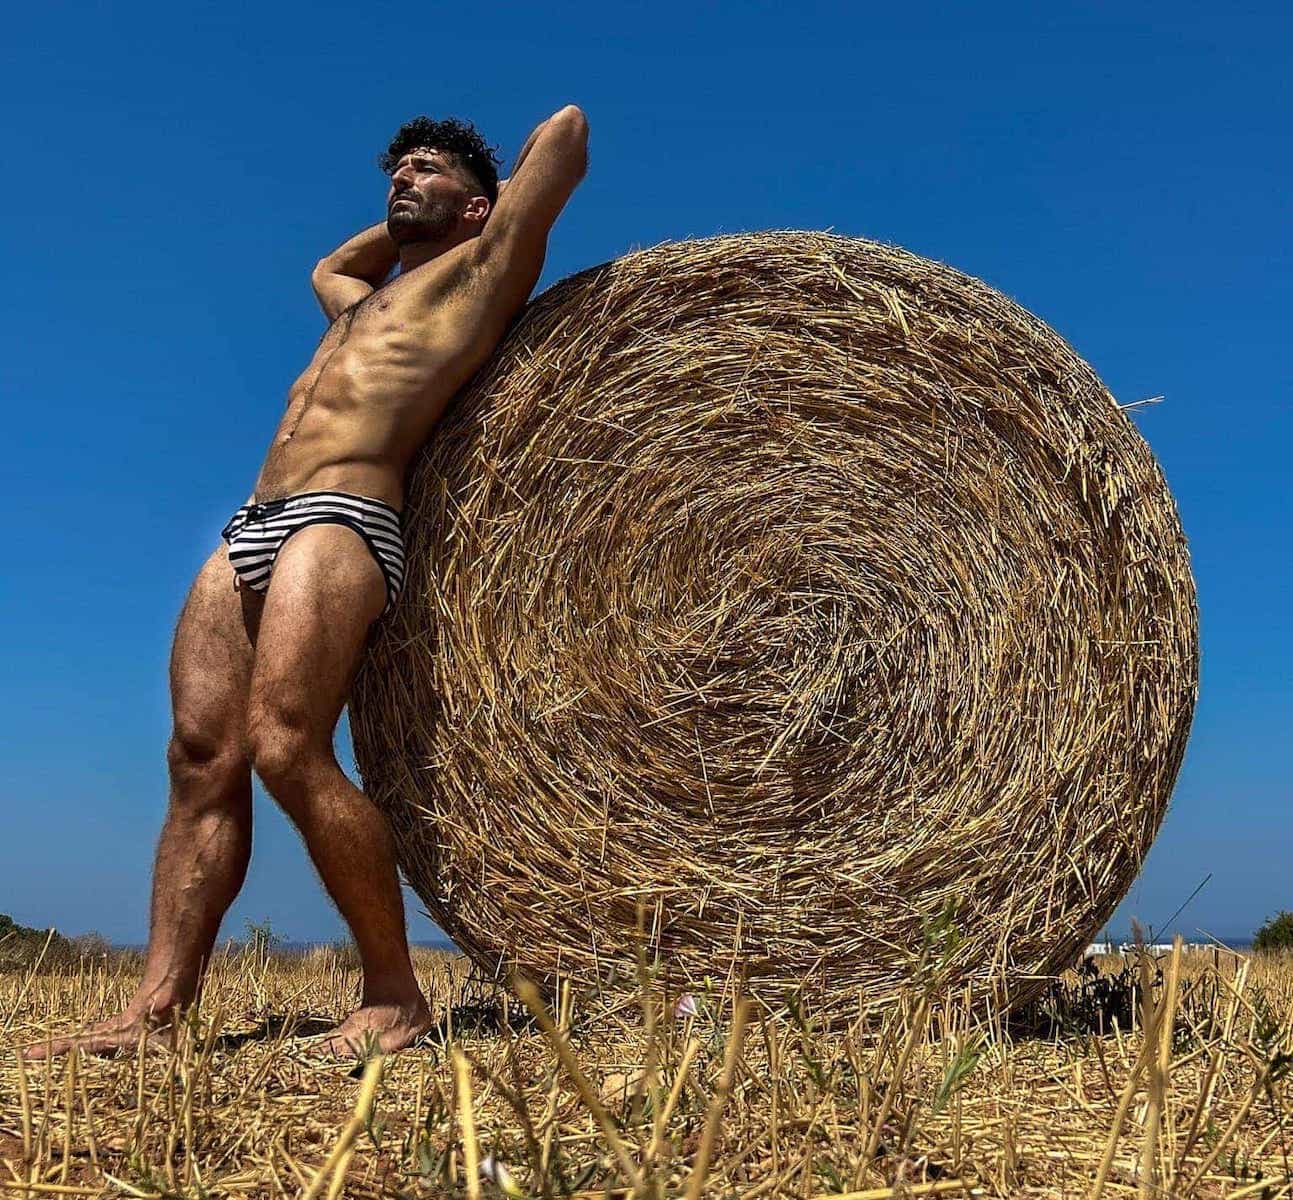 Stef in Addicted Sailor Speedos standing next to a large haystack.